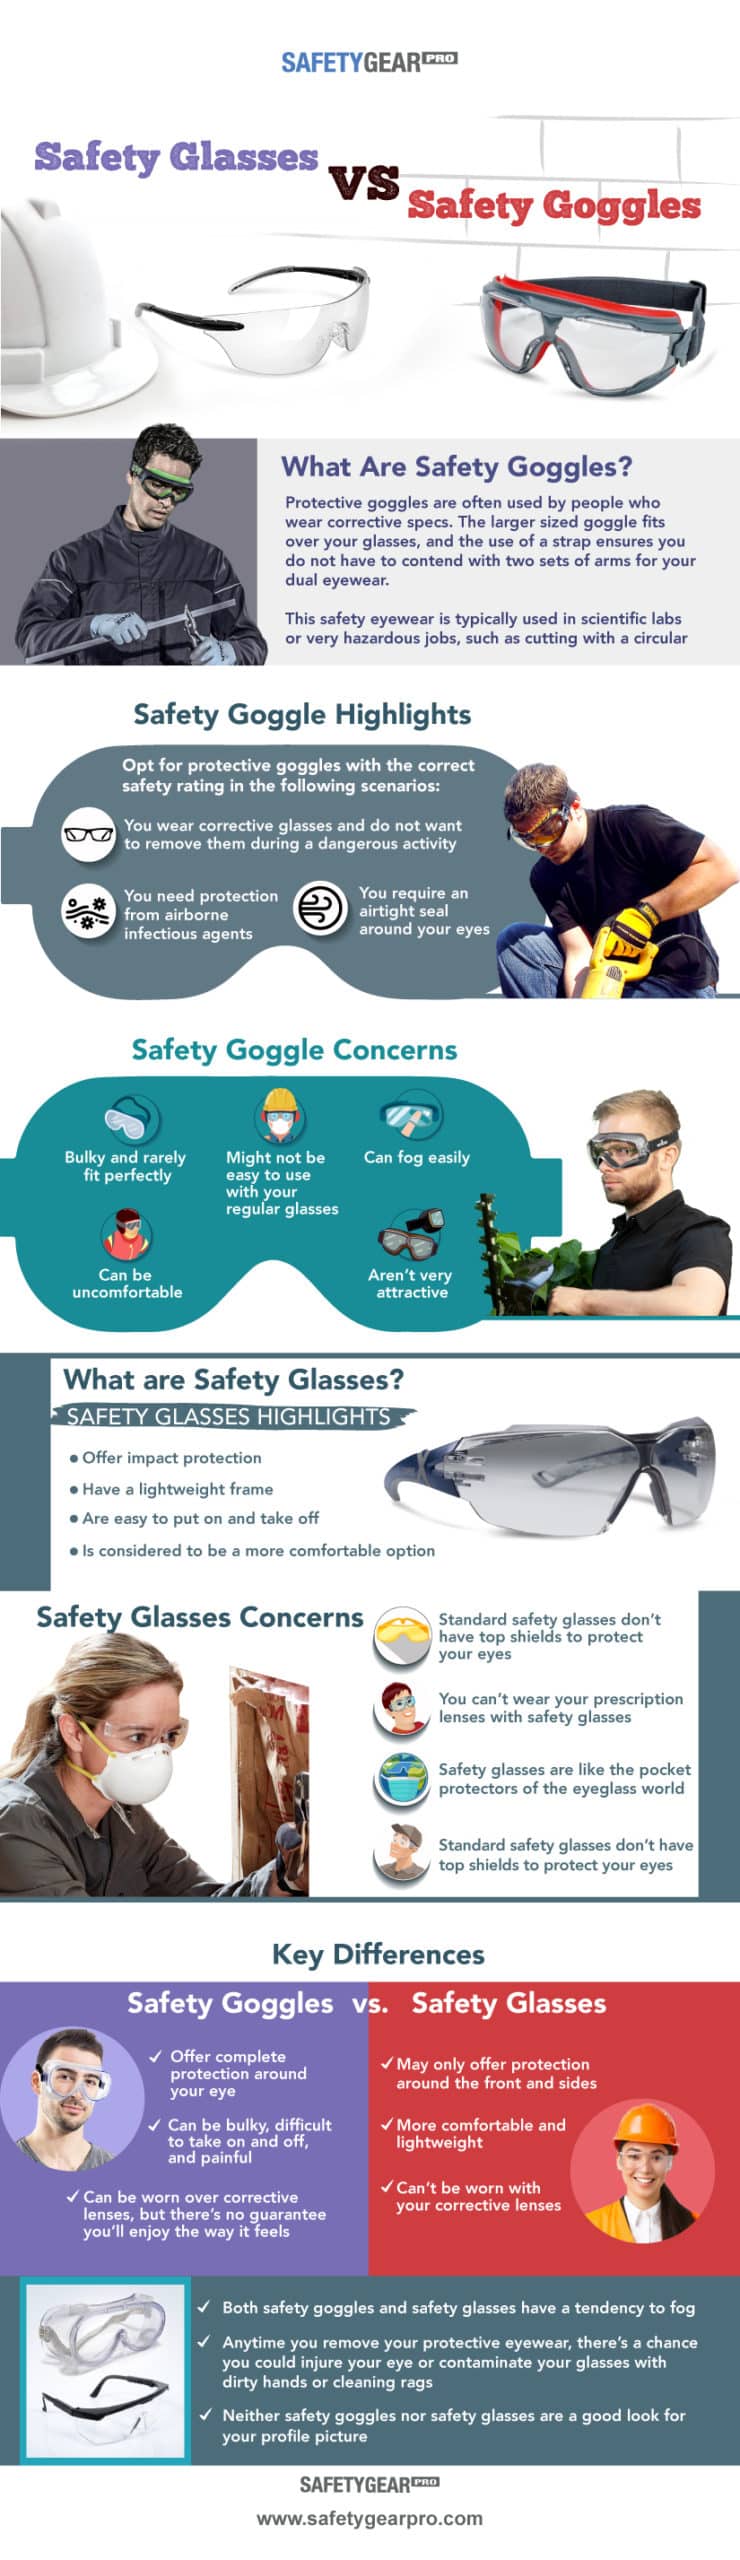 The Primary Differences Between Safety Glasses and Safety Goggles Infographic